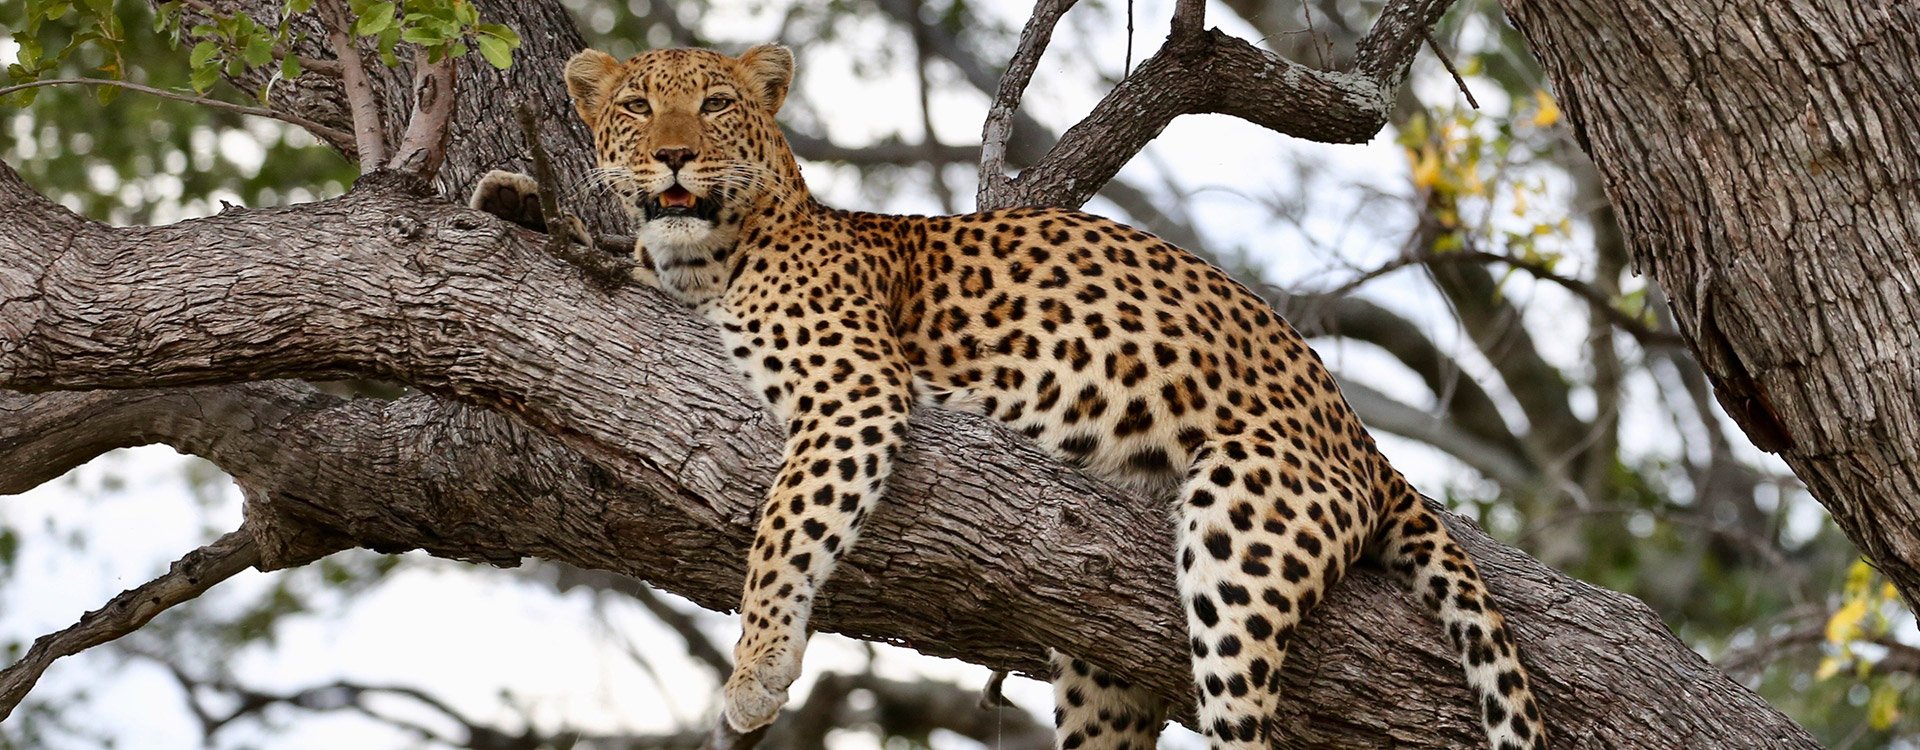 South Africa_Madikwe_Leopards